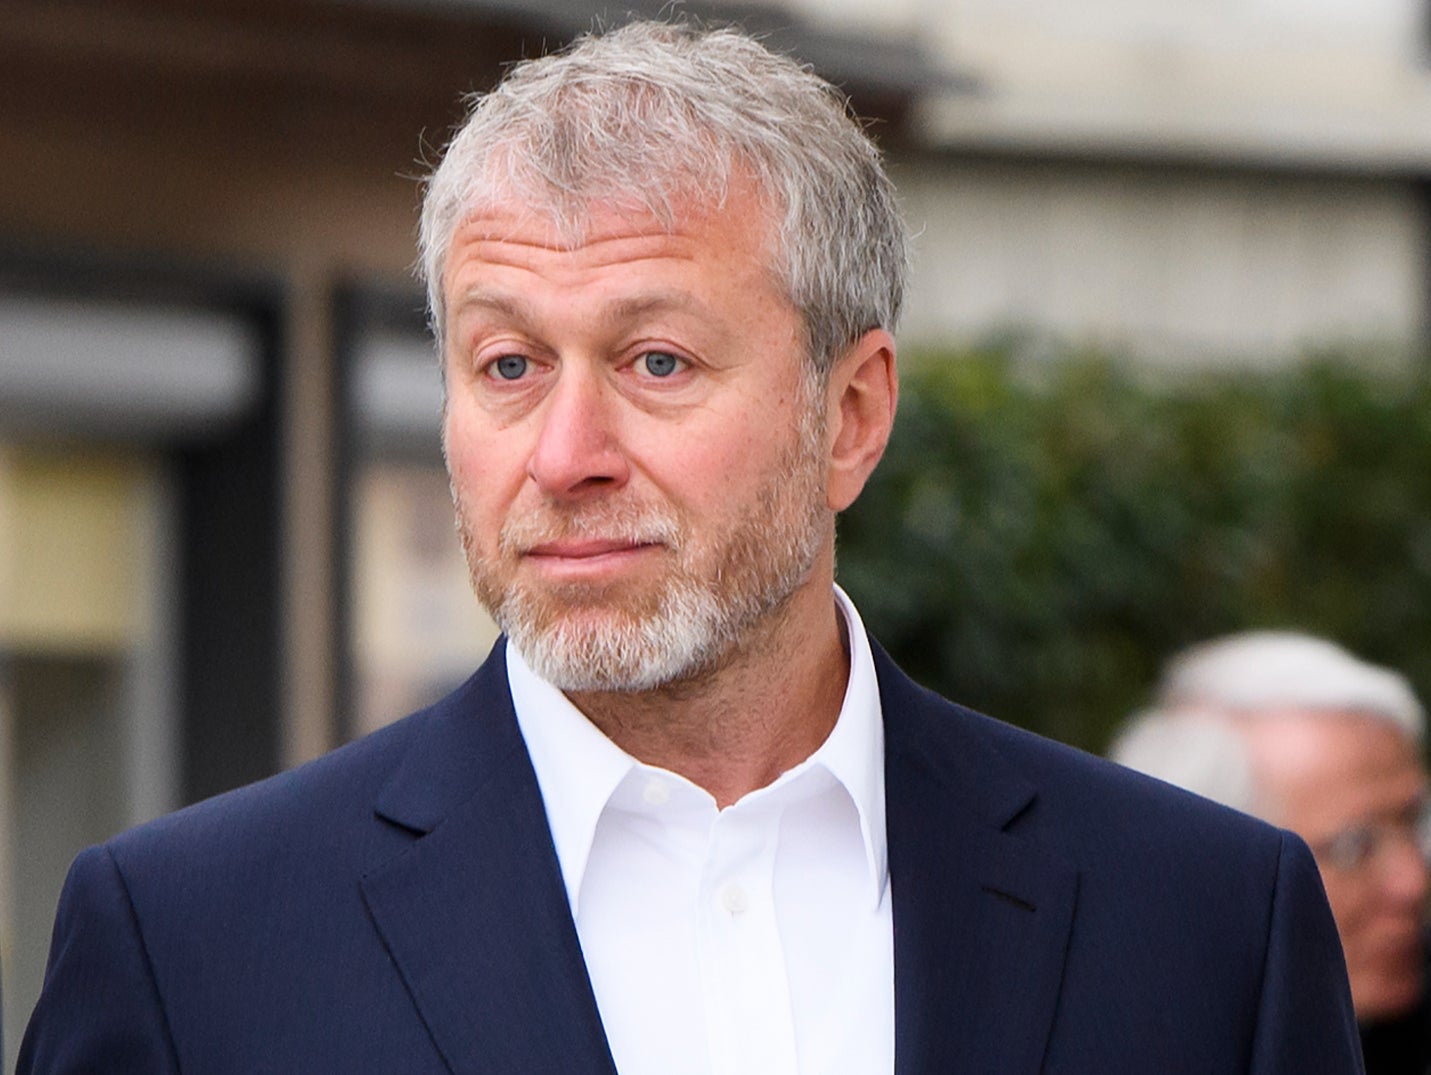 Roman Abramovich was reportedly a victim of an alleged poisoning